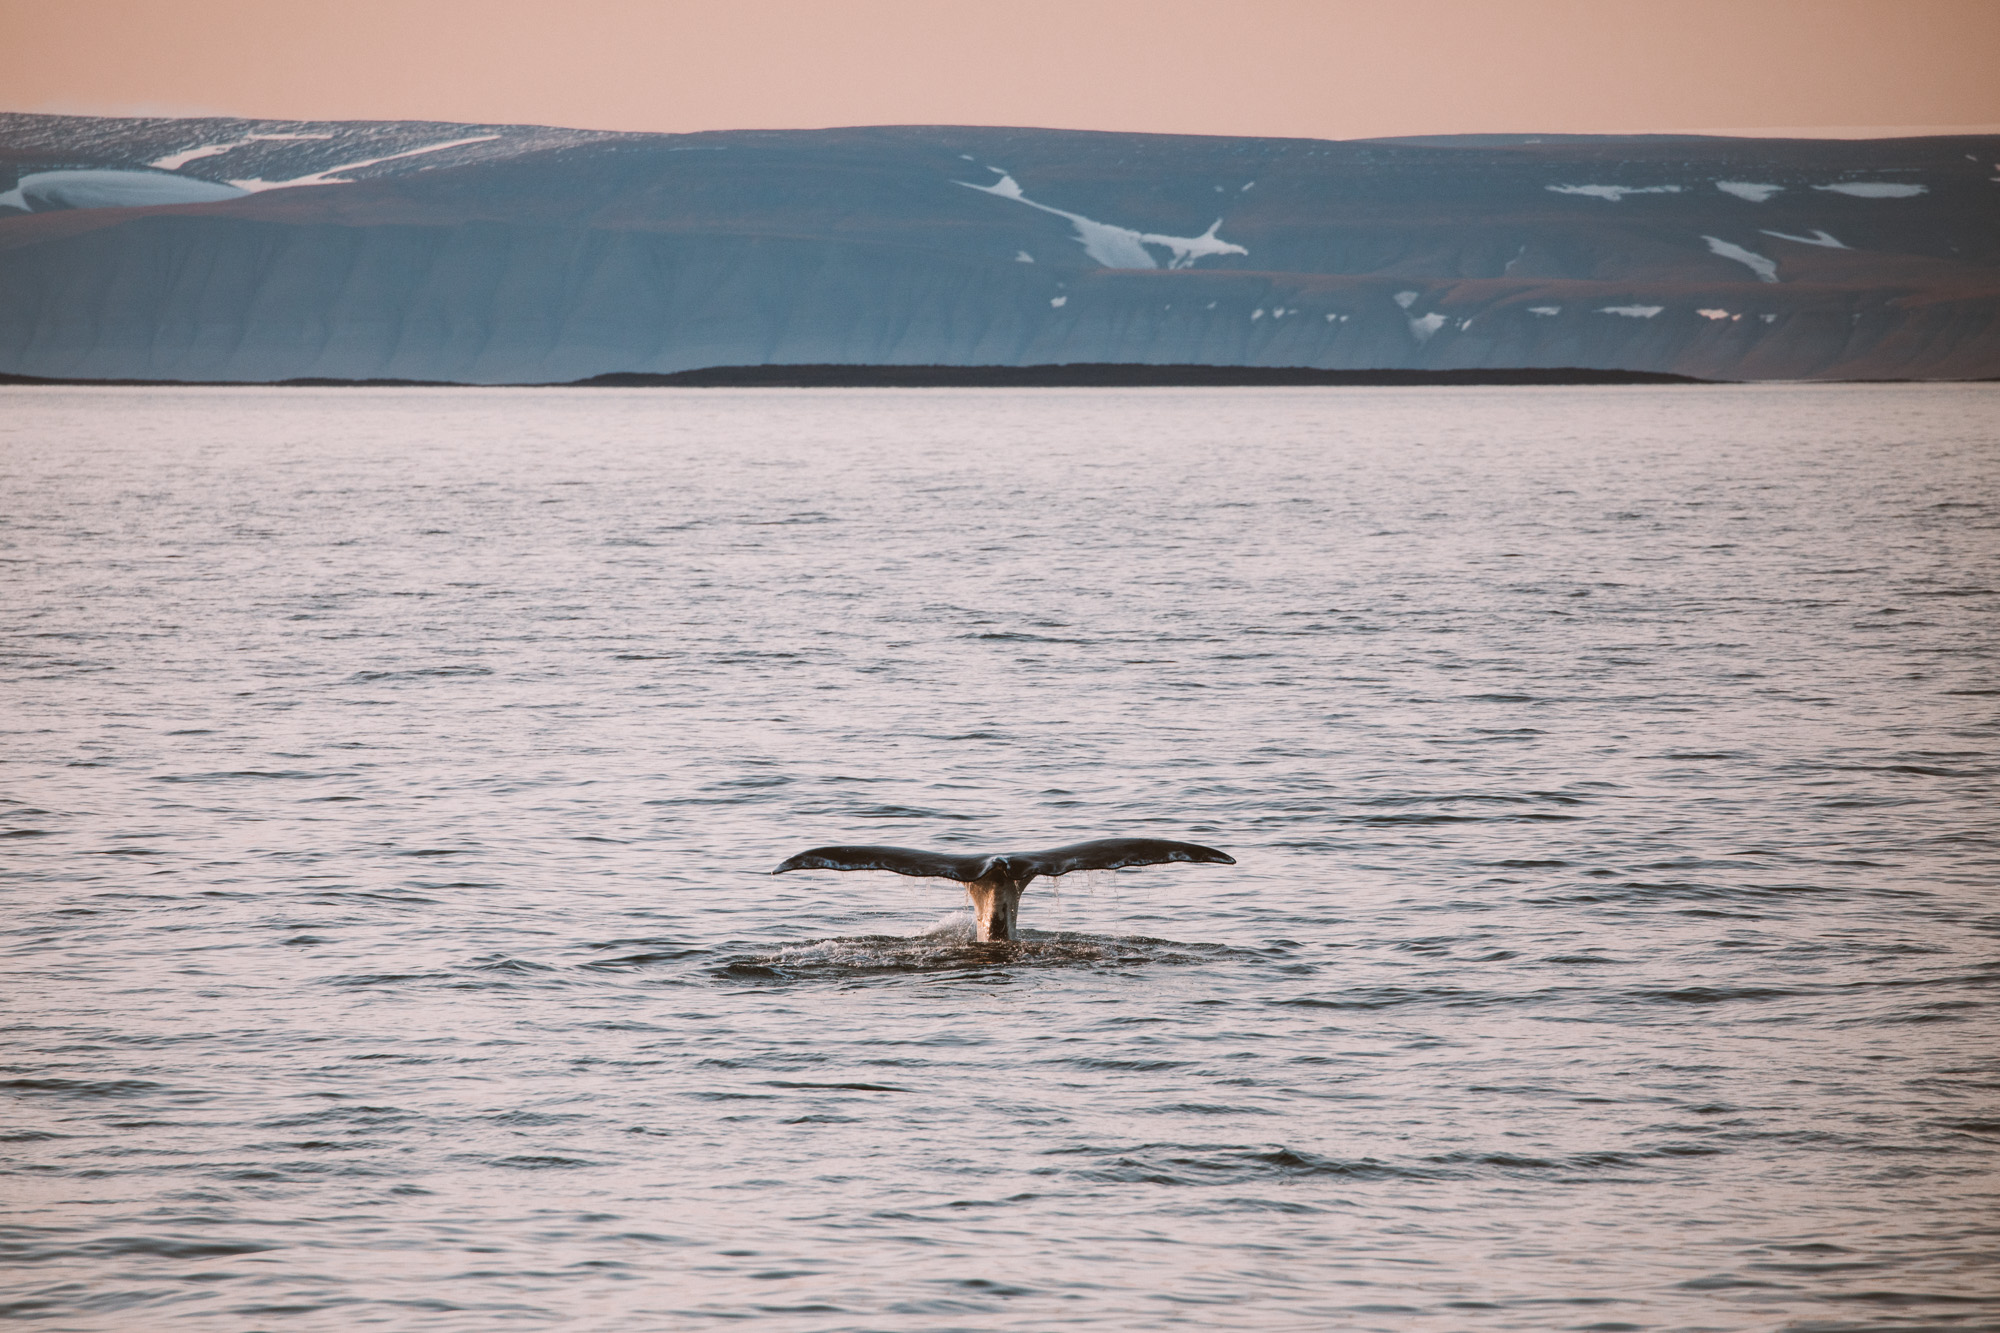 Bowhead whales from our polarquest ship in Spitsbergen, Svalbard, Norway